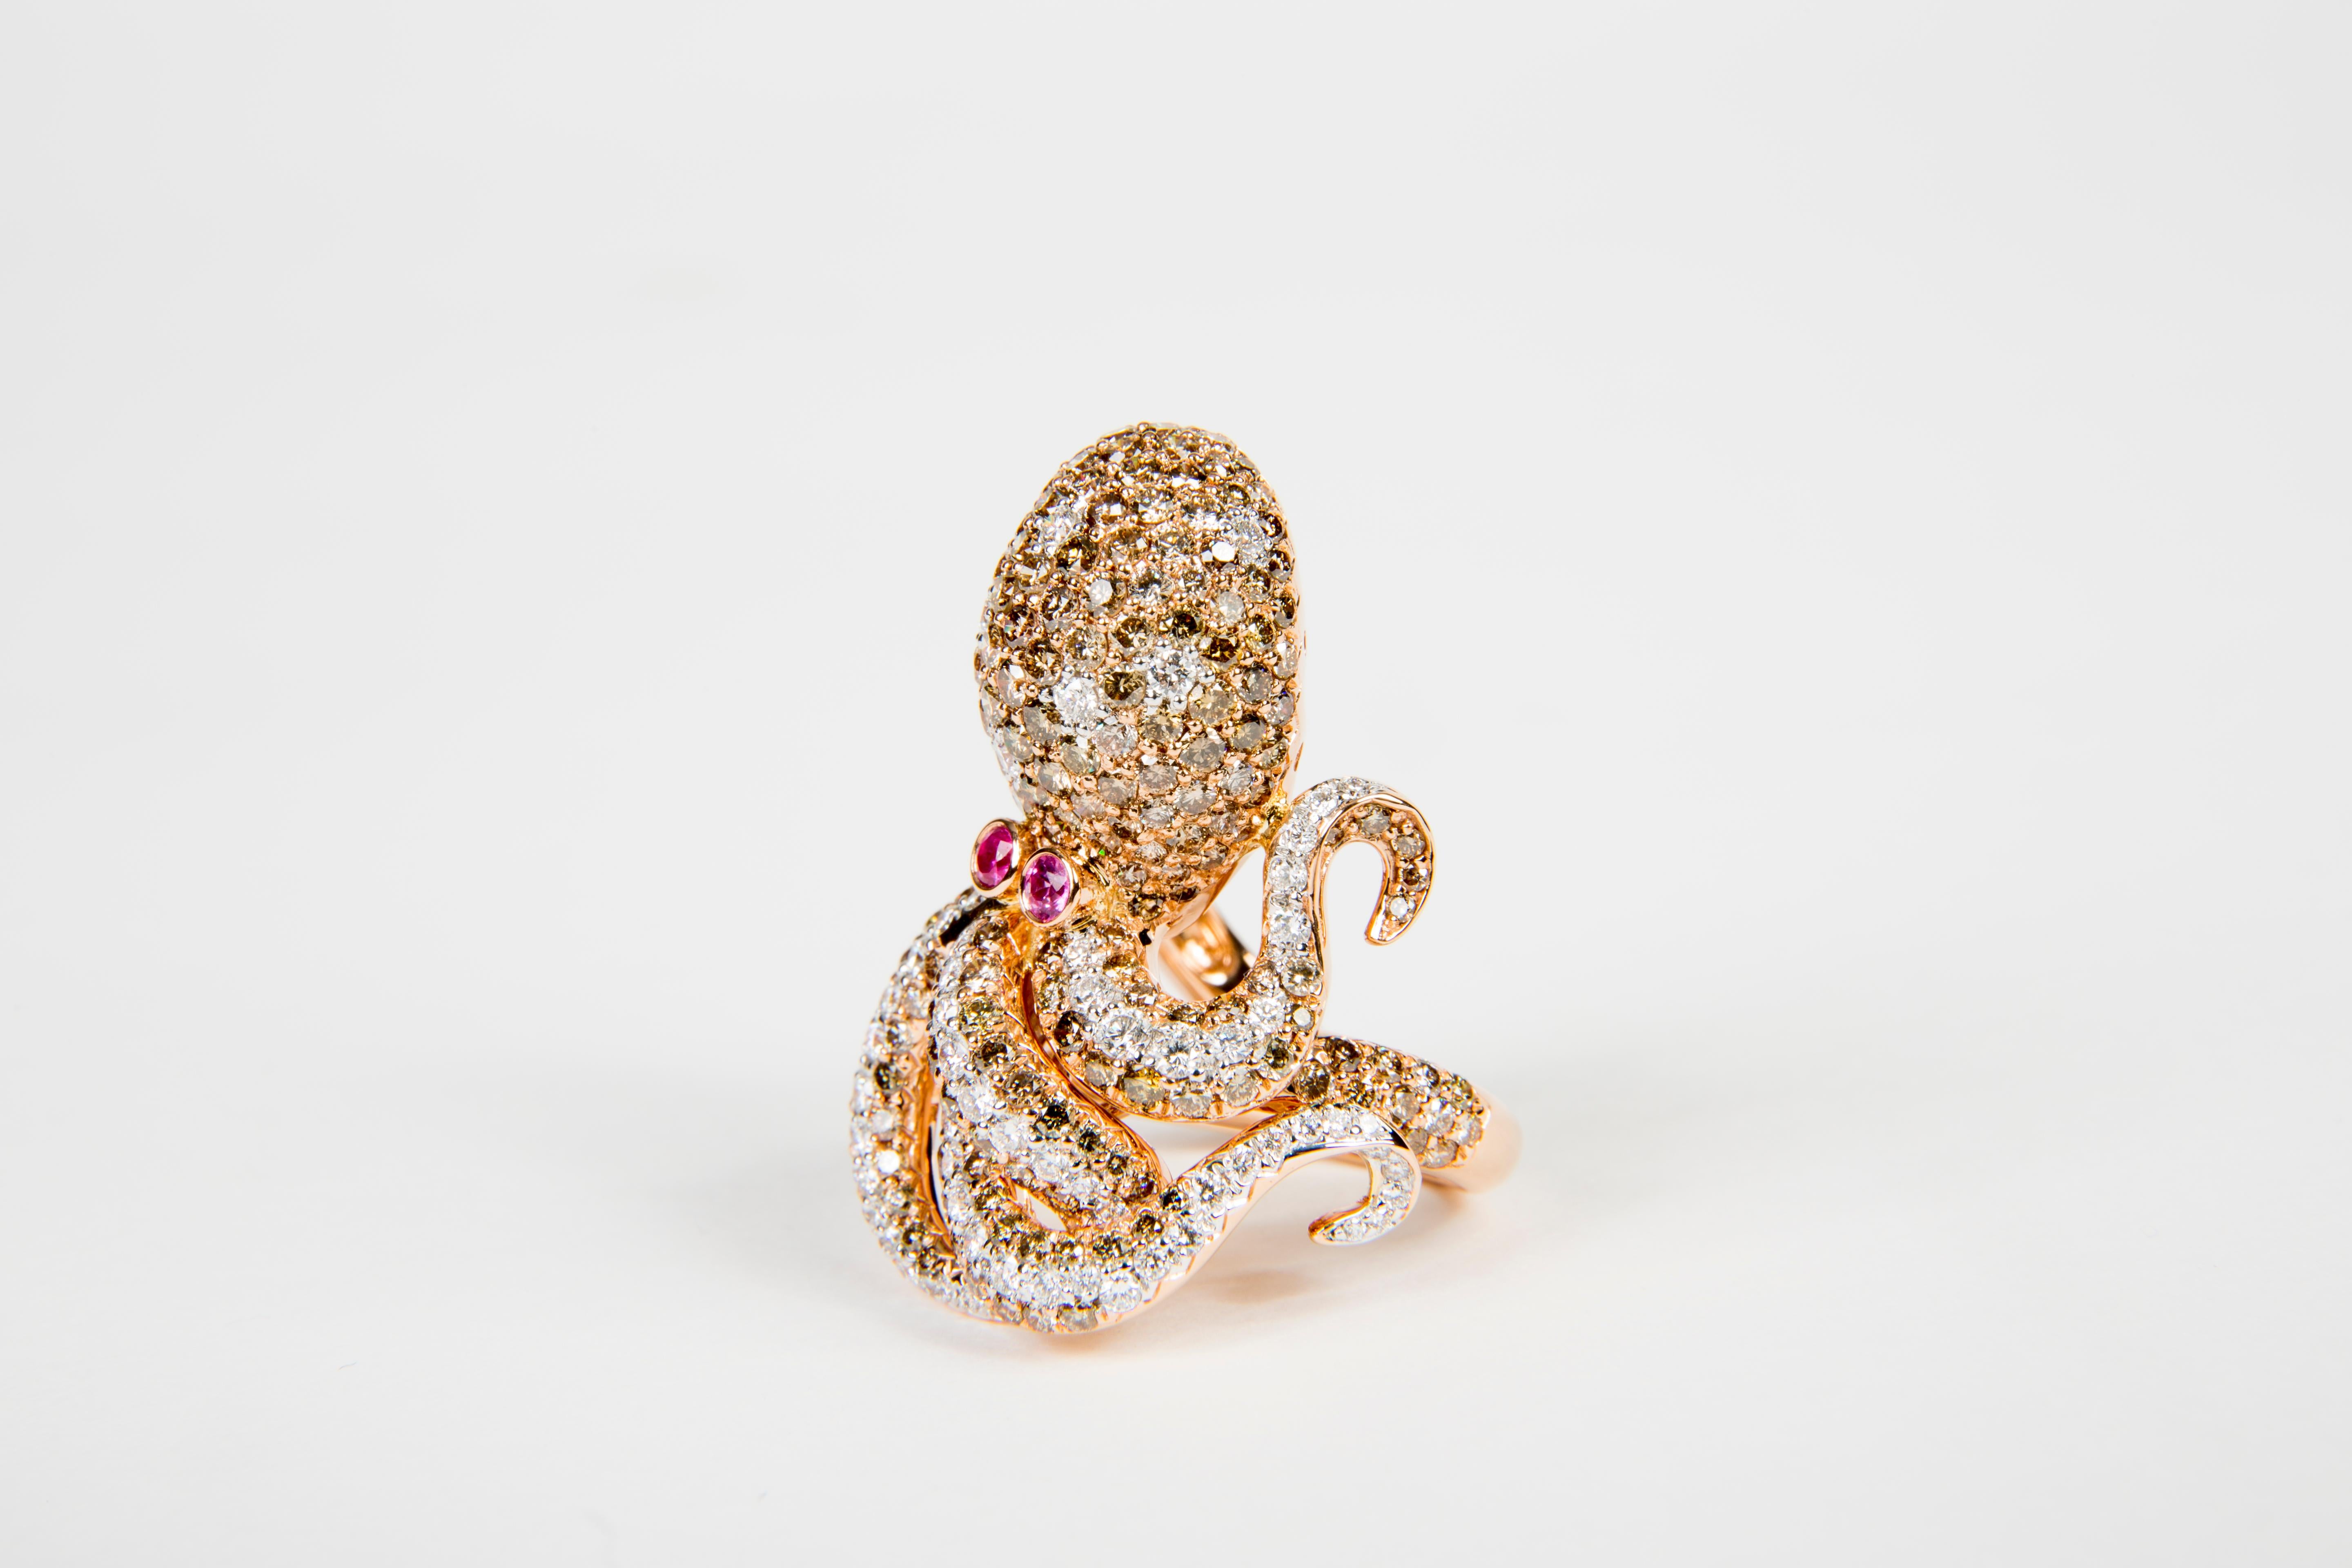 Cocktail Ring in Octopus Shape
1.22ct white diamonds (H/si)
4.33ct brown diamonds
eyes made of pink sapphires
18k rose gold 
ring size 54 (can be changed one size up or down)